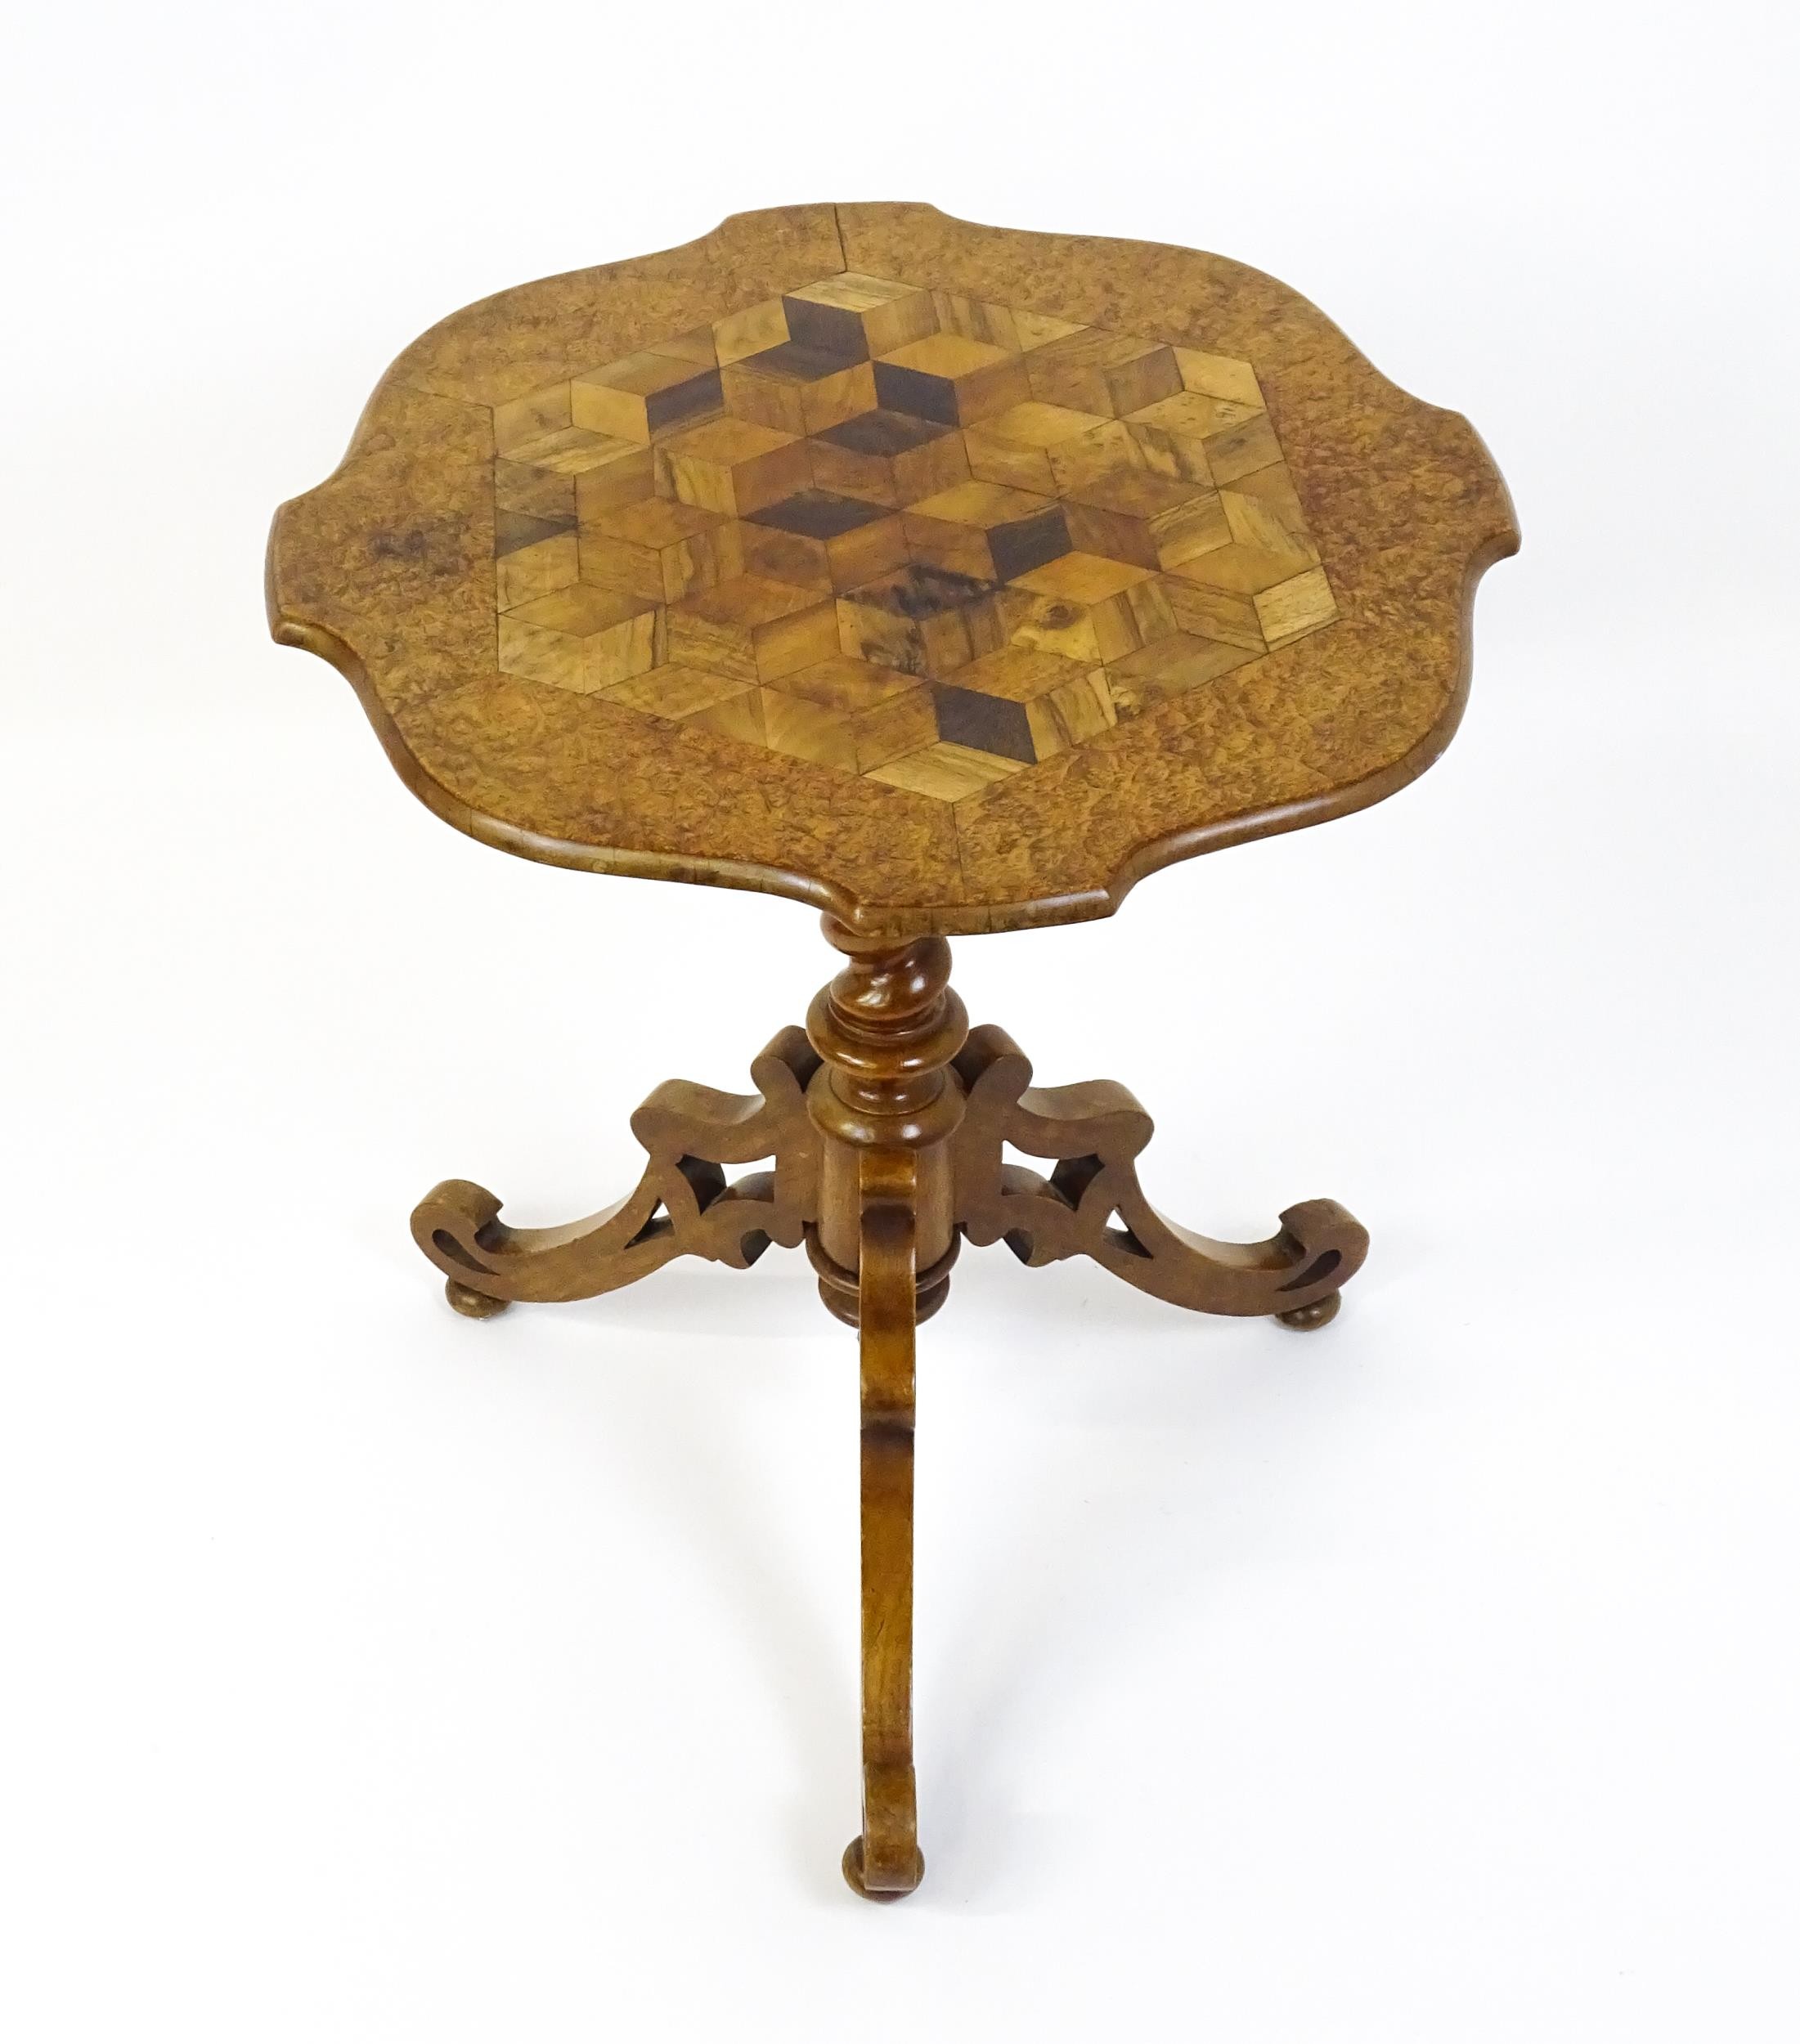 A 19thC tripod table with a burr amboyna veneered top surrounding a central parquetry style sample - Image 6 of 10